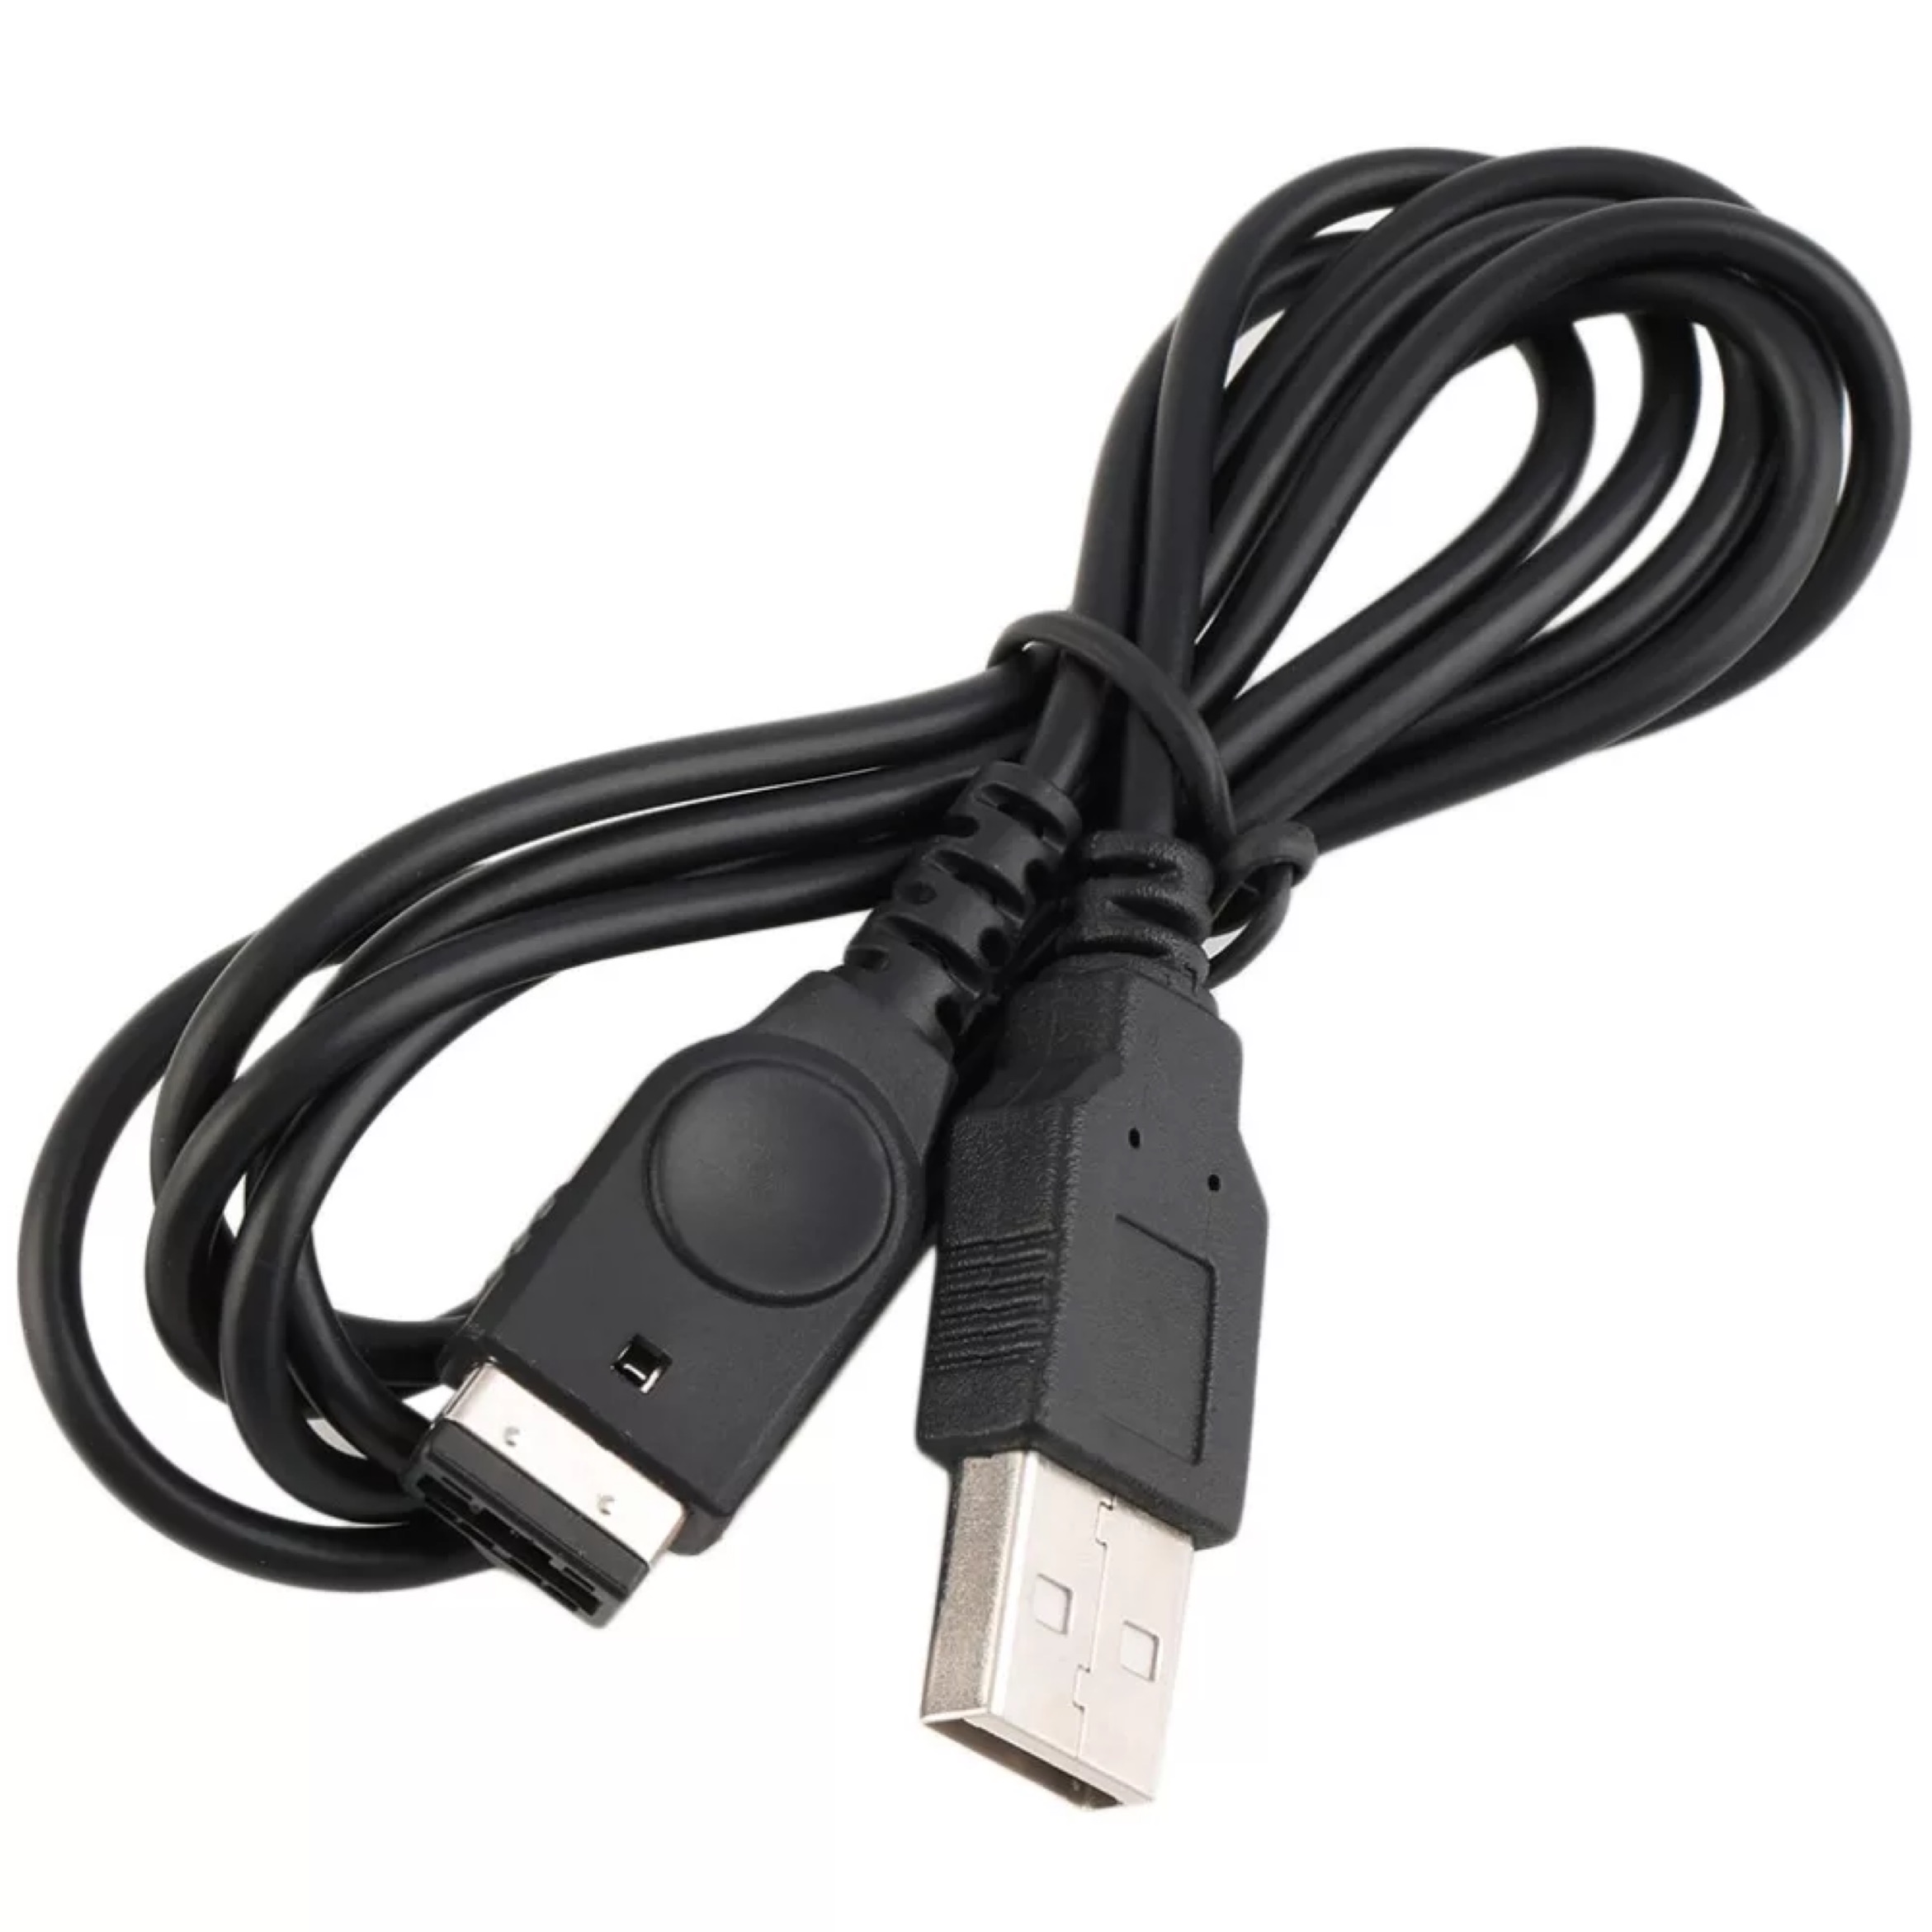 1.2m Black USB Data For NintenCharger Cable for Gameboy A